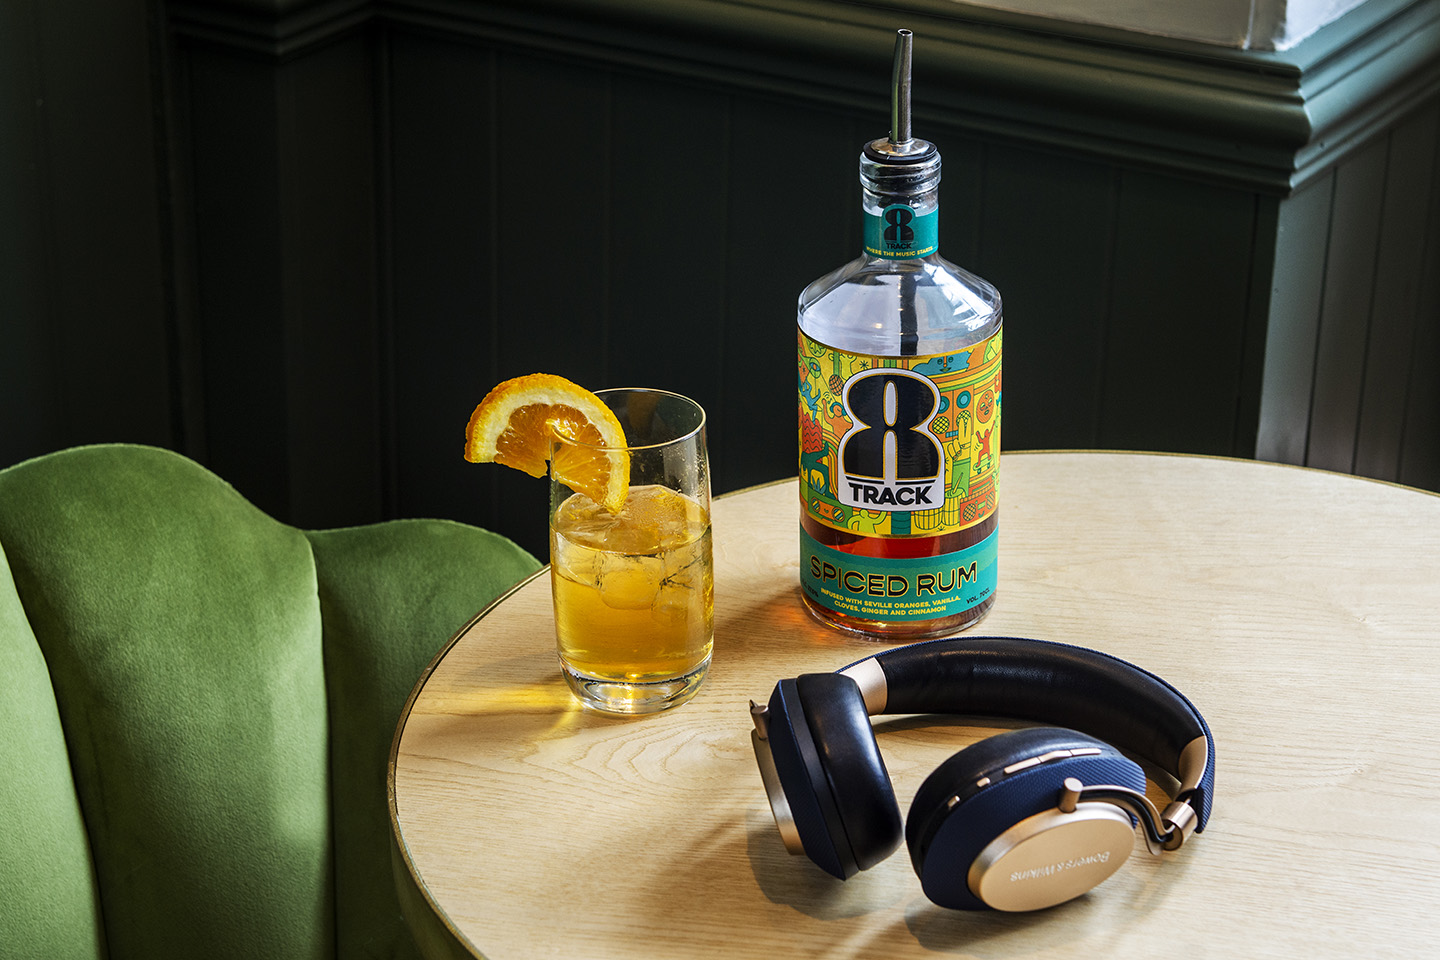 Bottle of 8Track Rum on a table with a glass of rum over ice with a slice of orange on the side. A pair of headphones sit on the table as well with a green chair to the left.